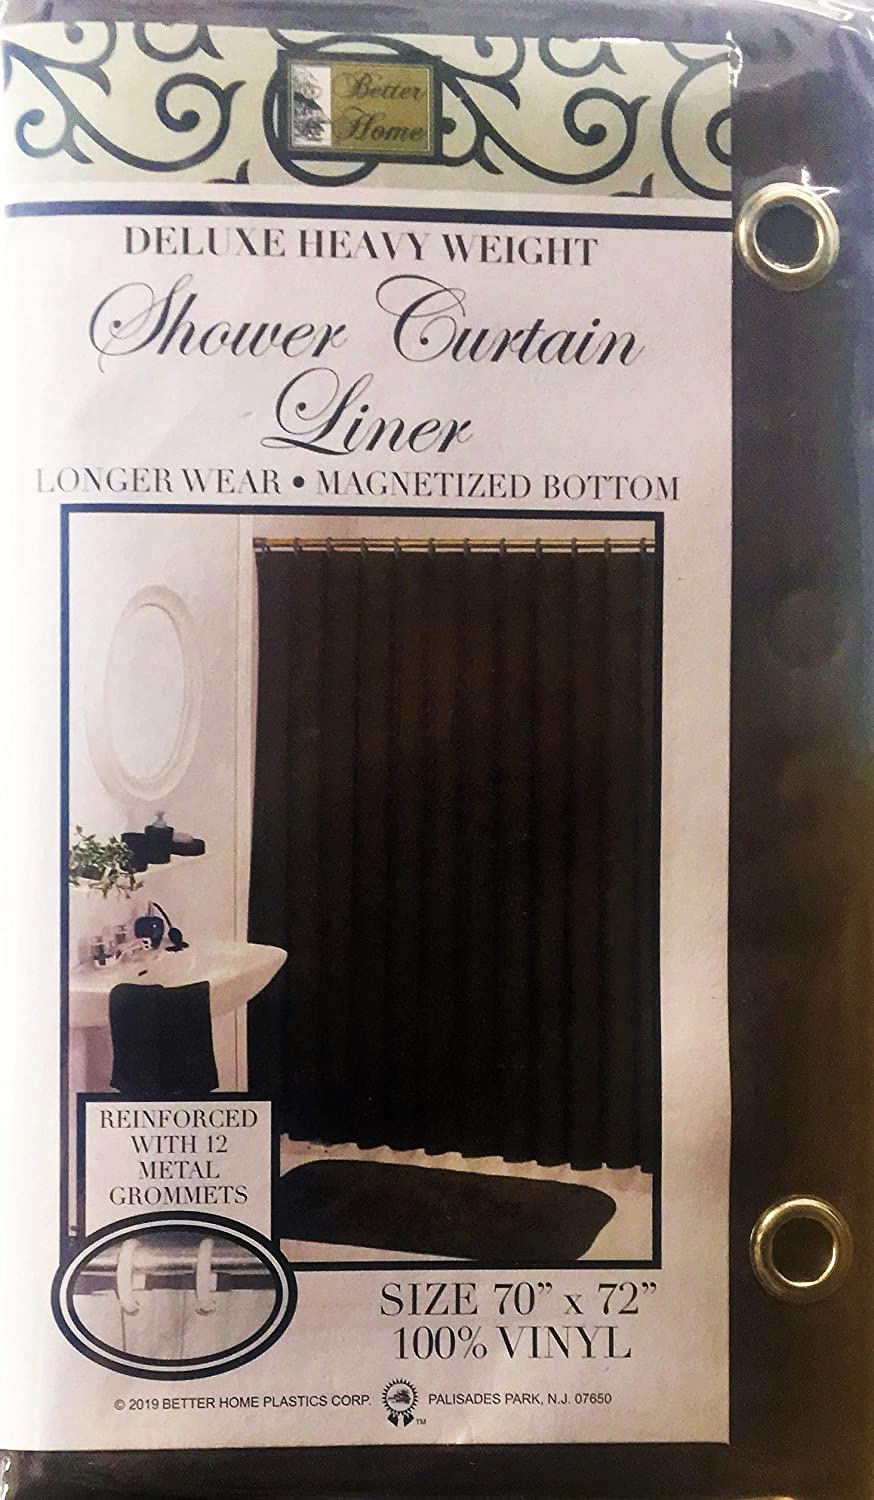 Deluxe Heavy Weight Shower Curtain Liner - 70" x 72"